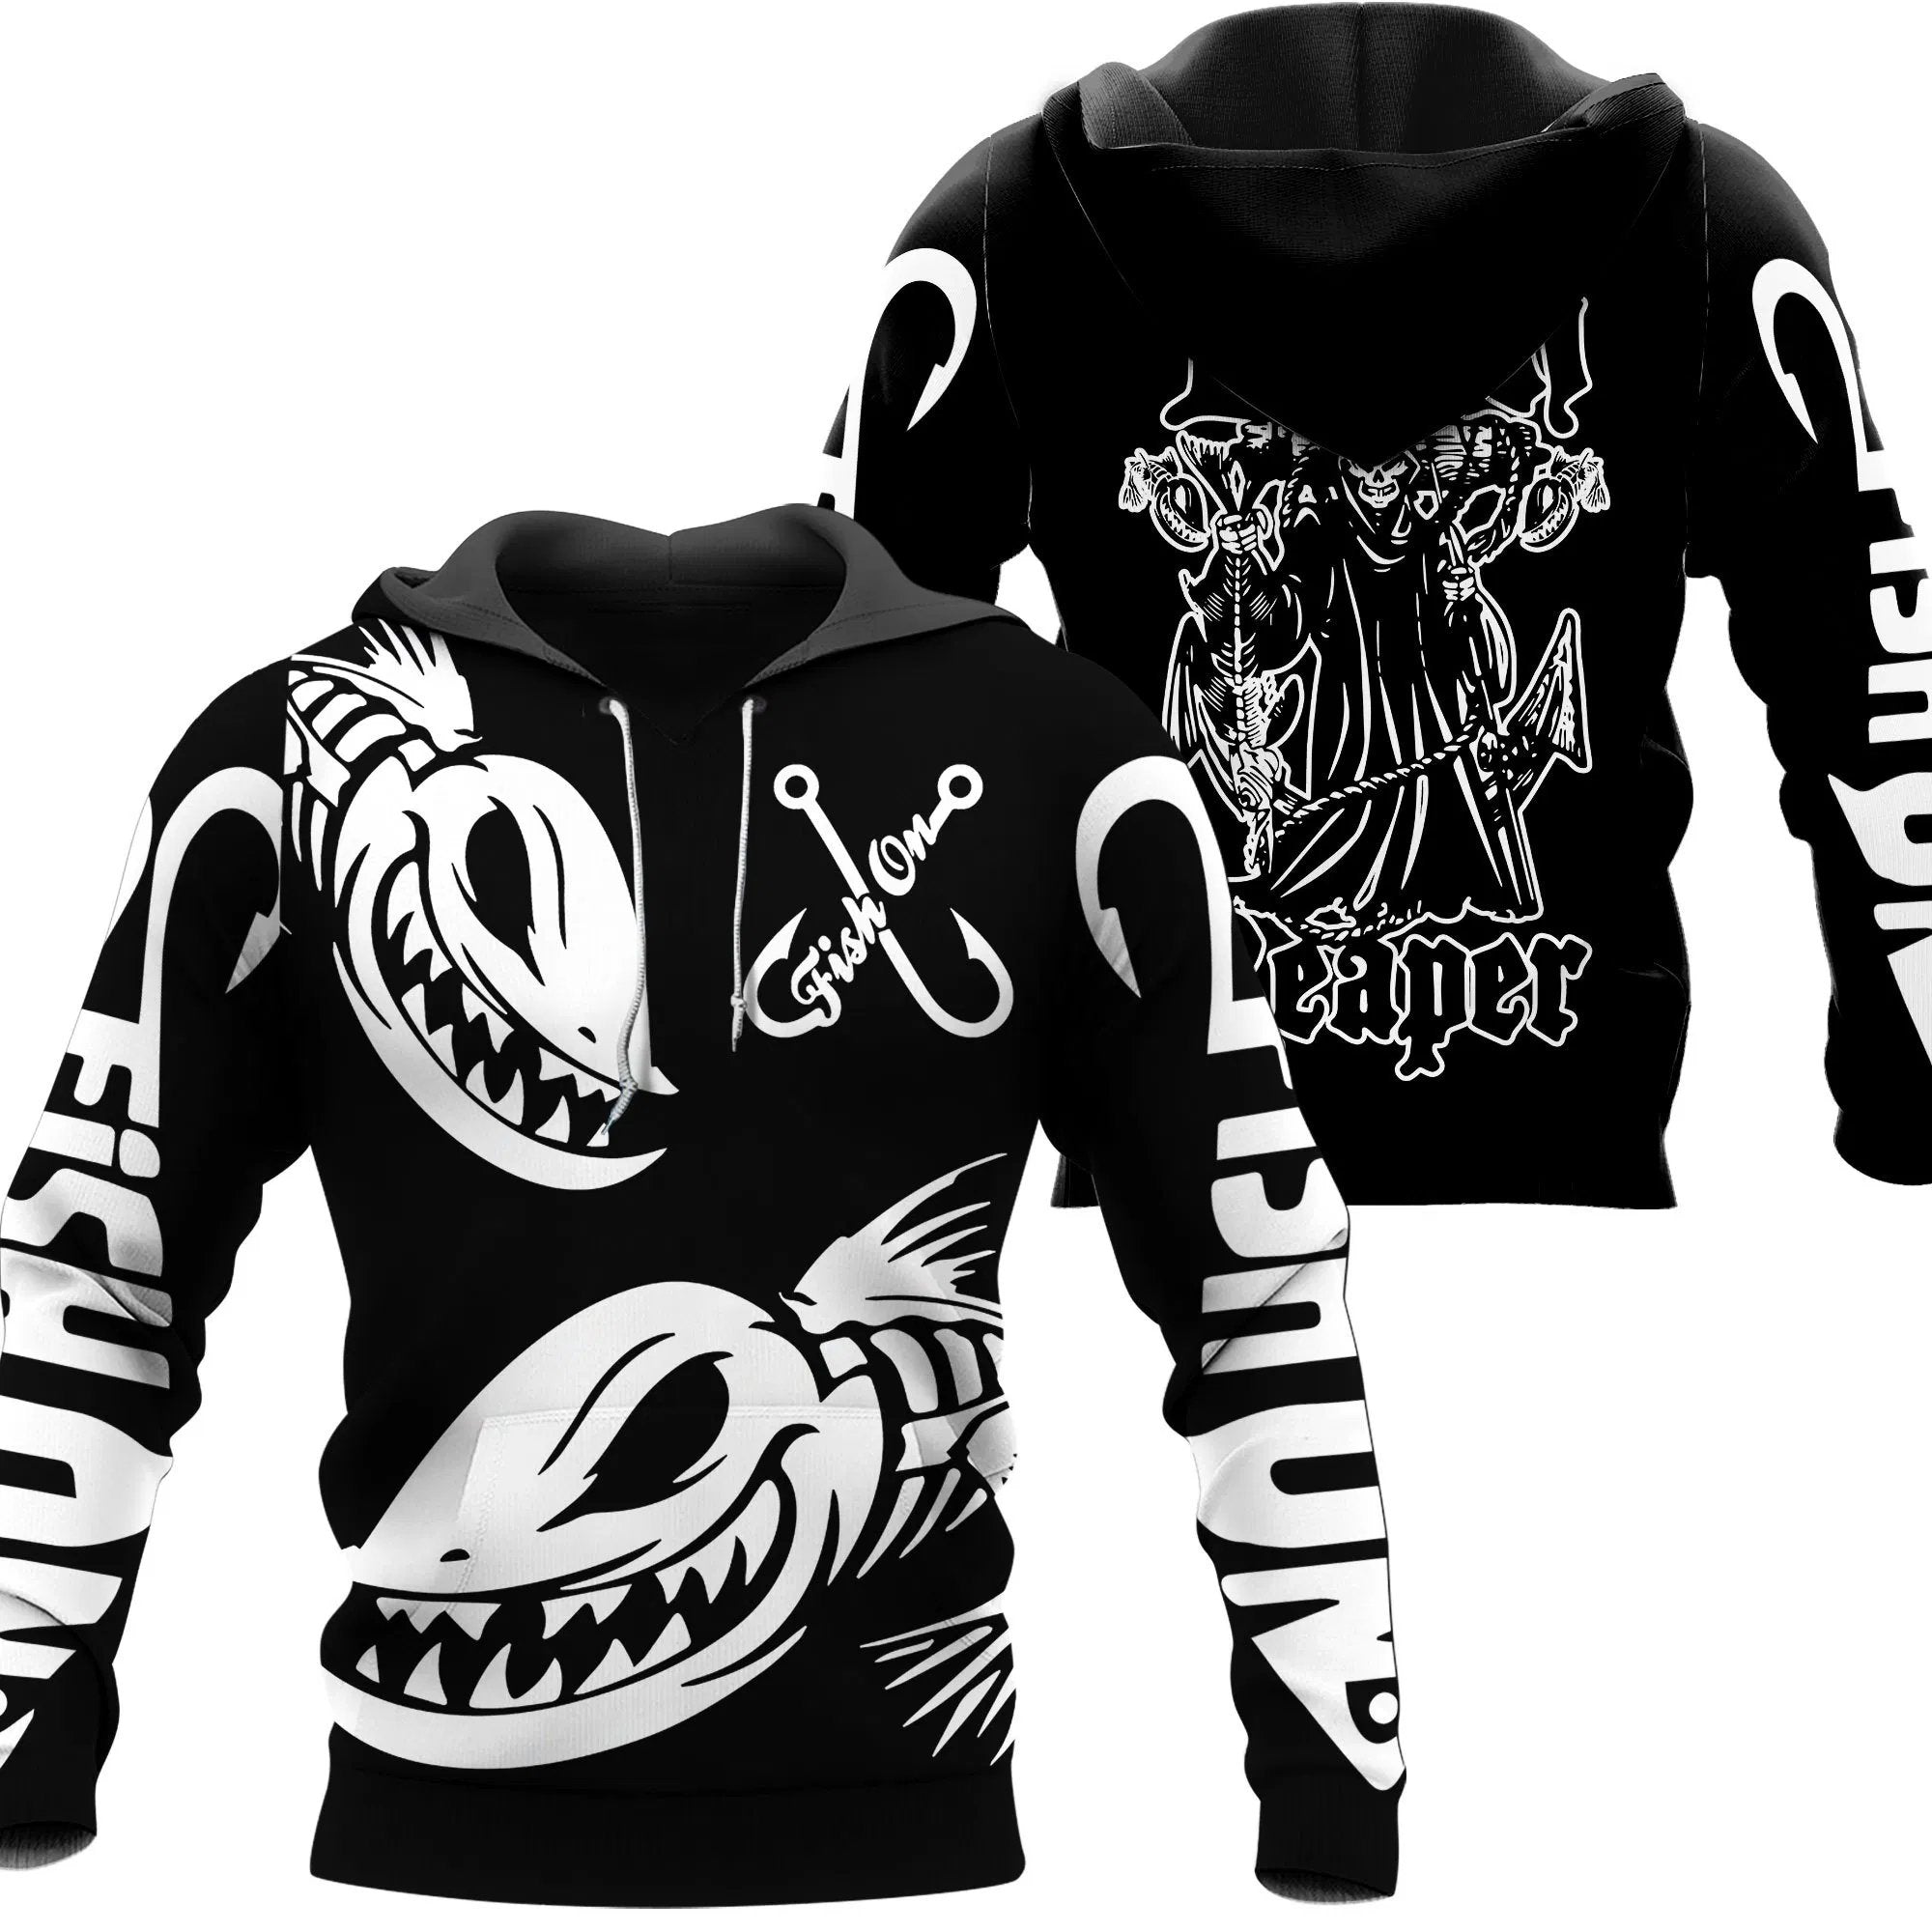 Black fishing hoodie with the grim reaper holding a fish on the back. Fish On logon on chest and sleeve. Black hoodie with white text. Two big angry fish on front.